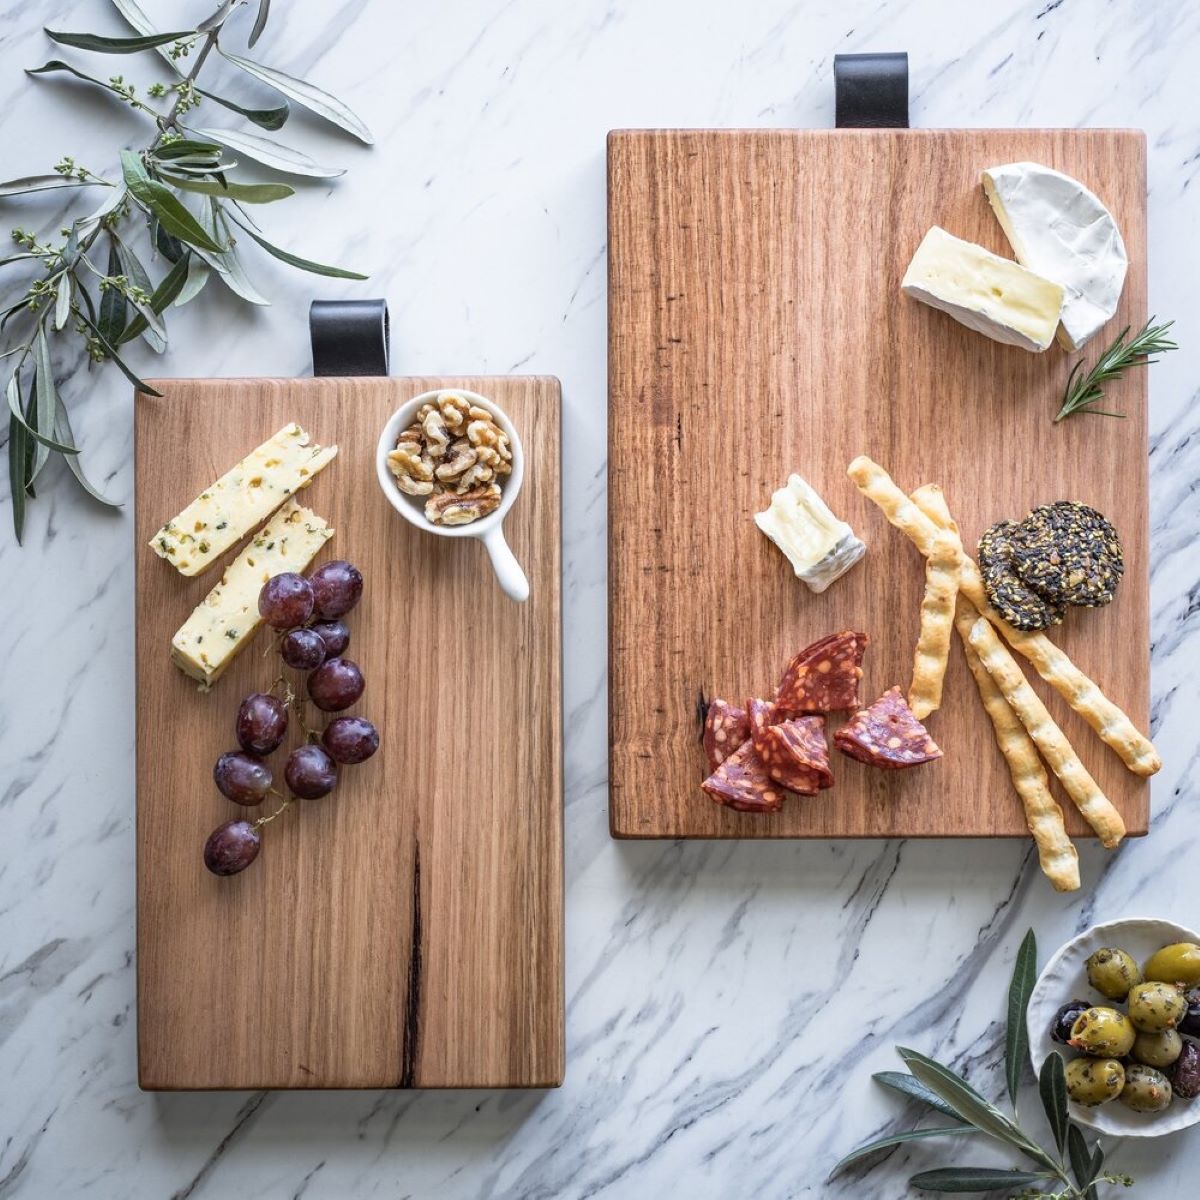 How To Store A Charcuterie Board